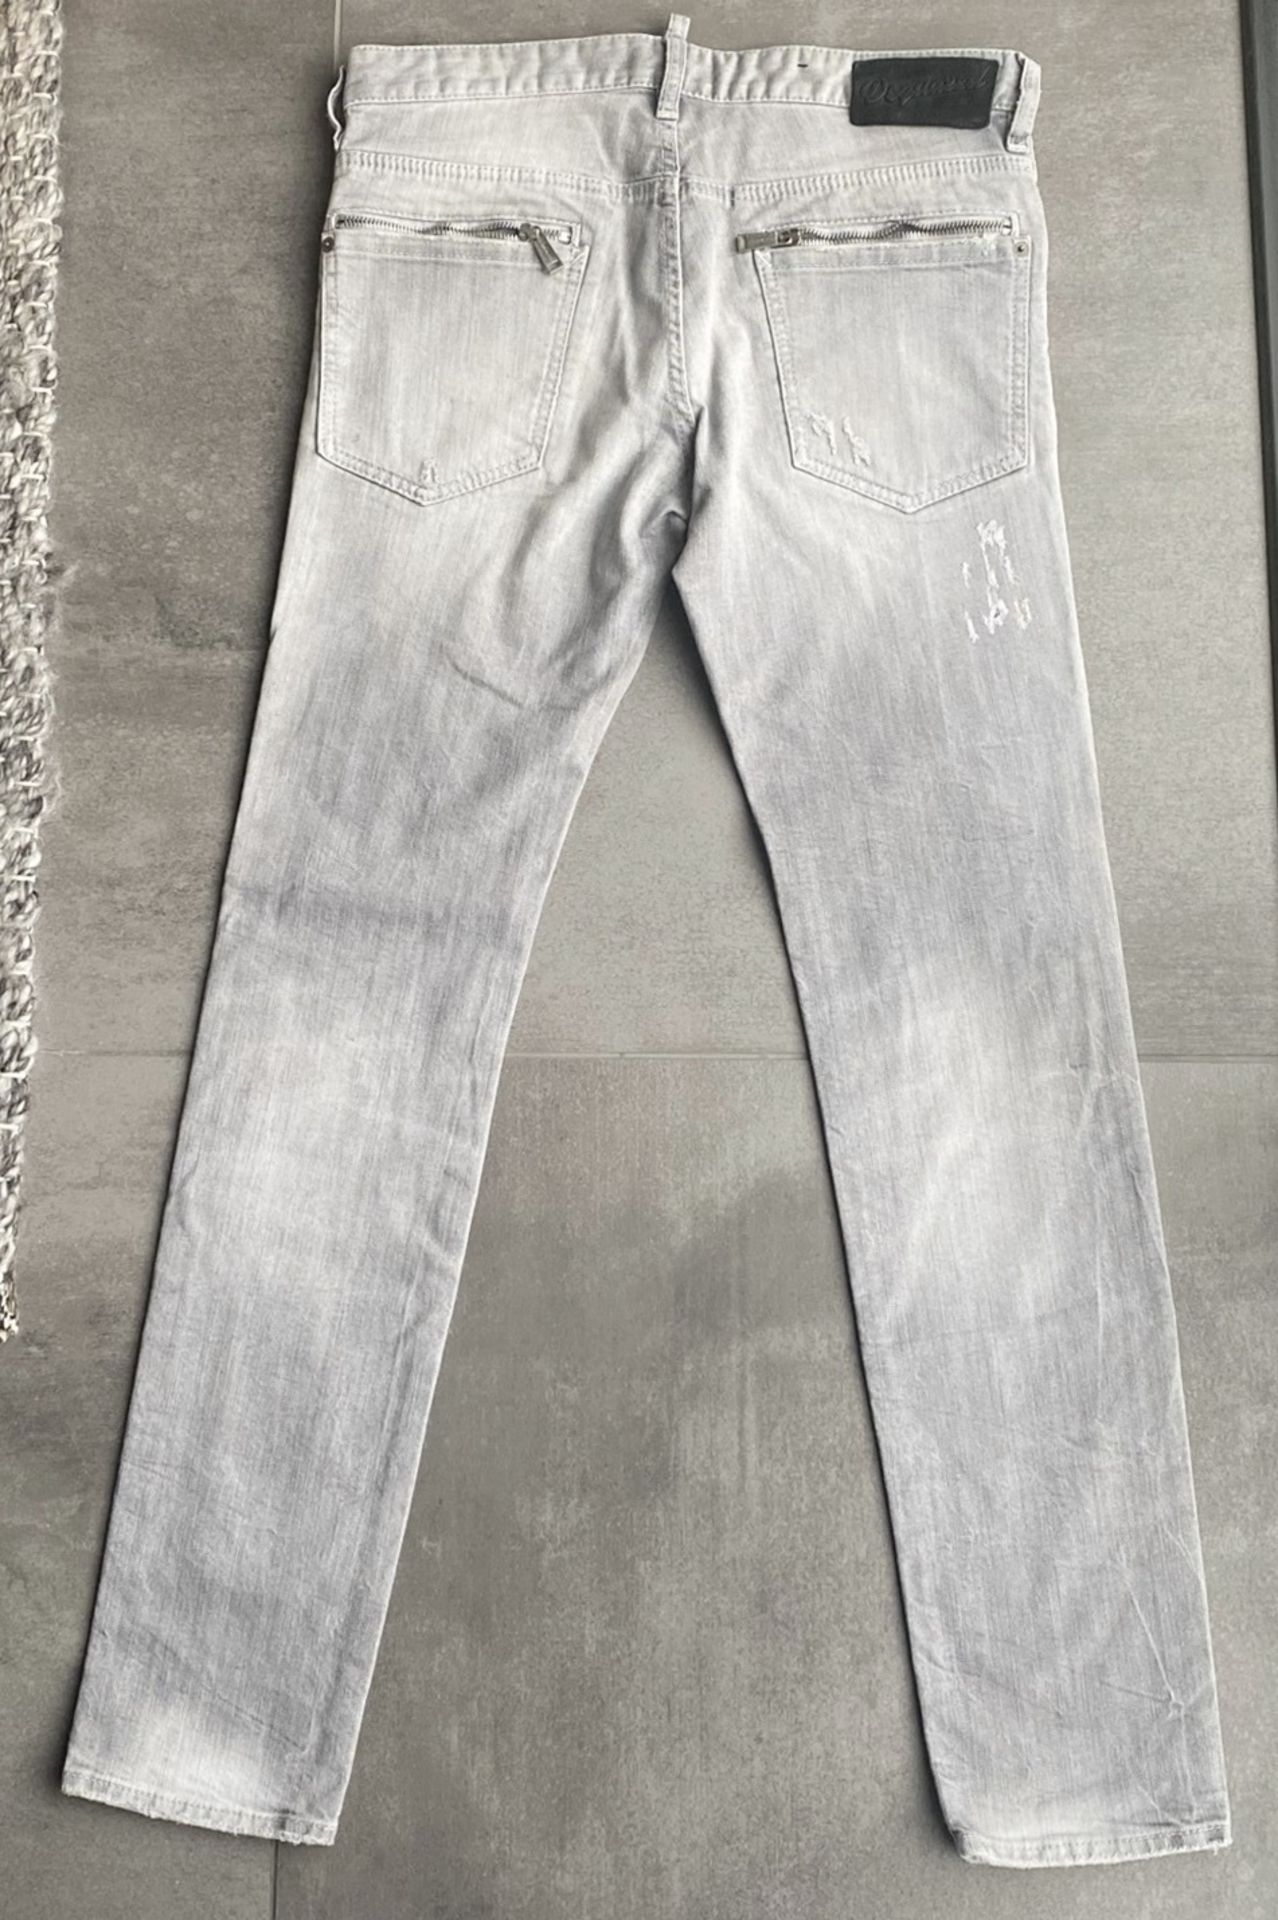 1 x Pair Of Men's Genuine Dsquared2 Designer Jeans In Grey - Waist Size: UK 32 / Italy 48 - Image 4 of 8